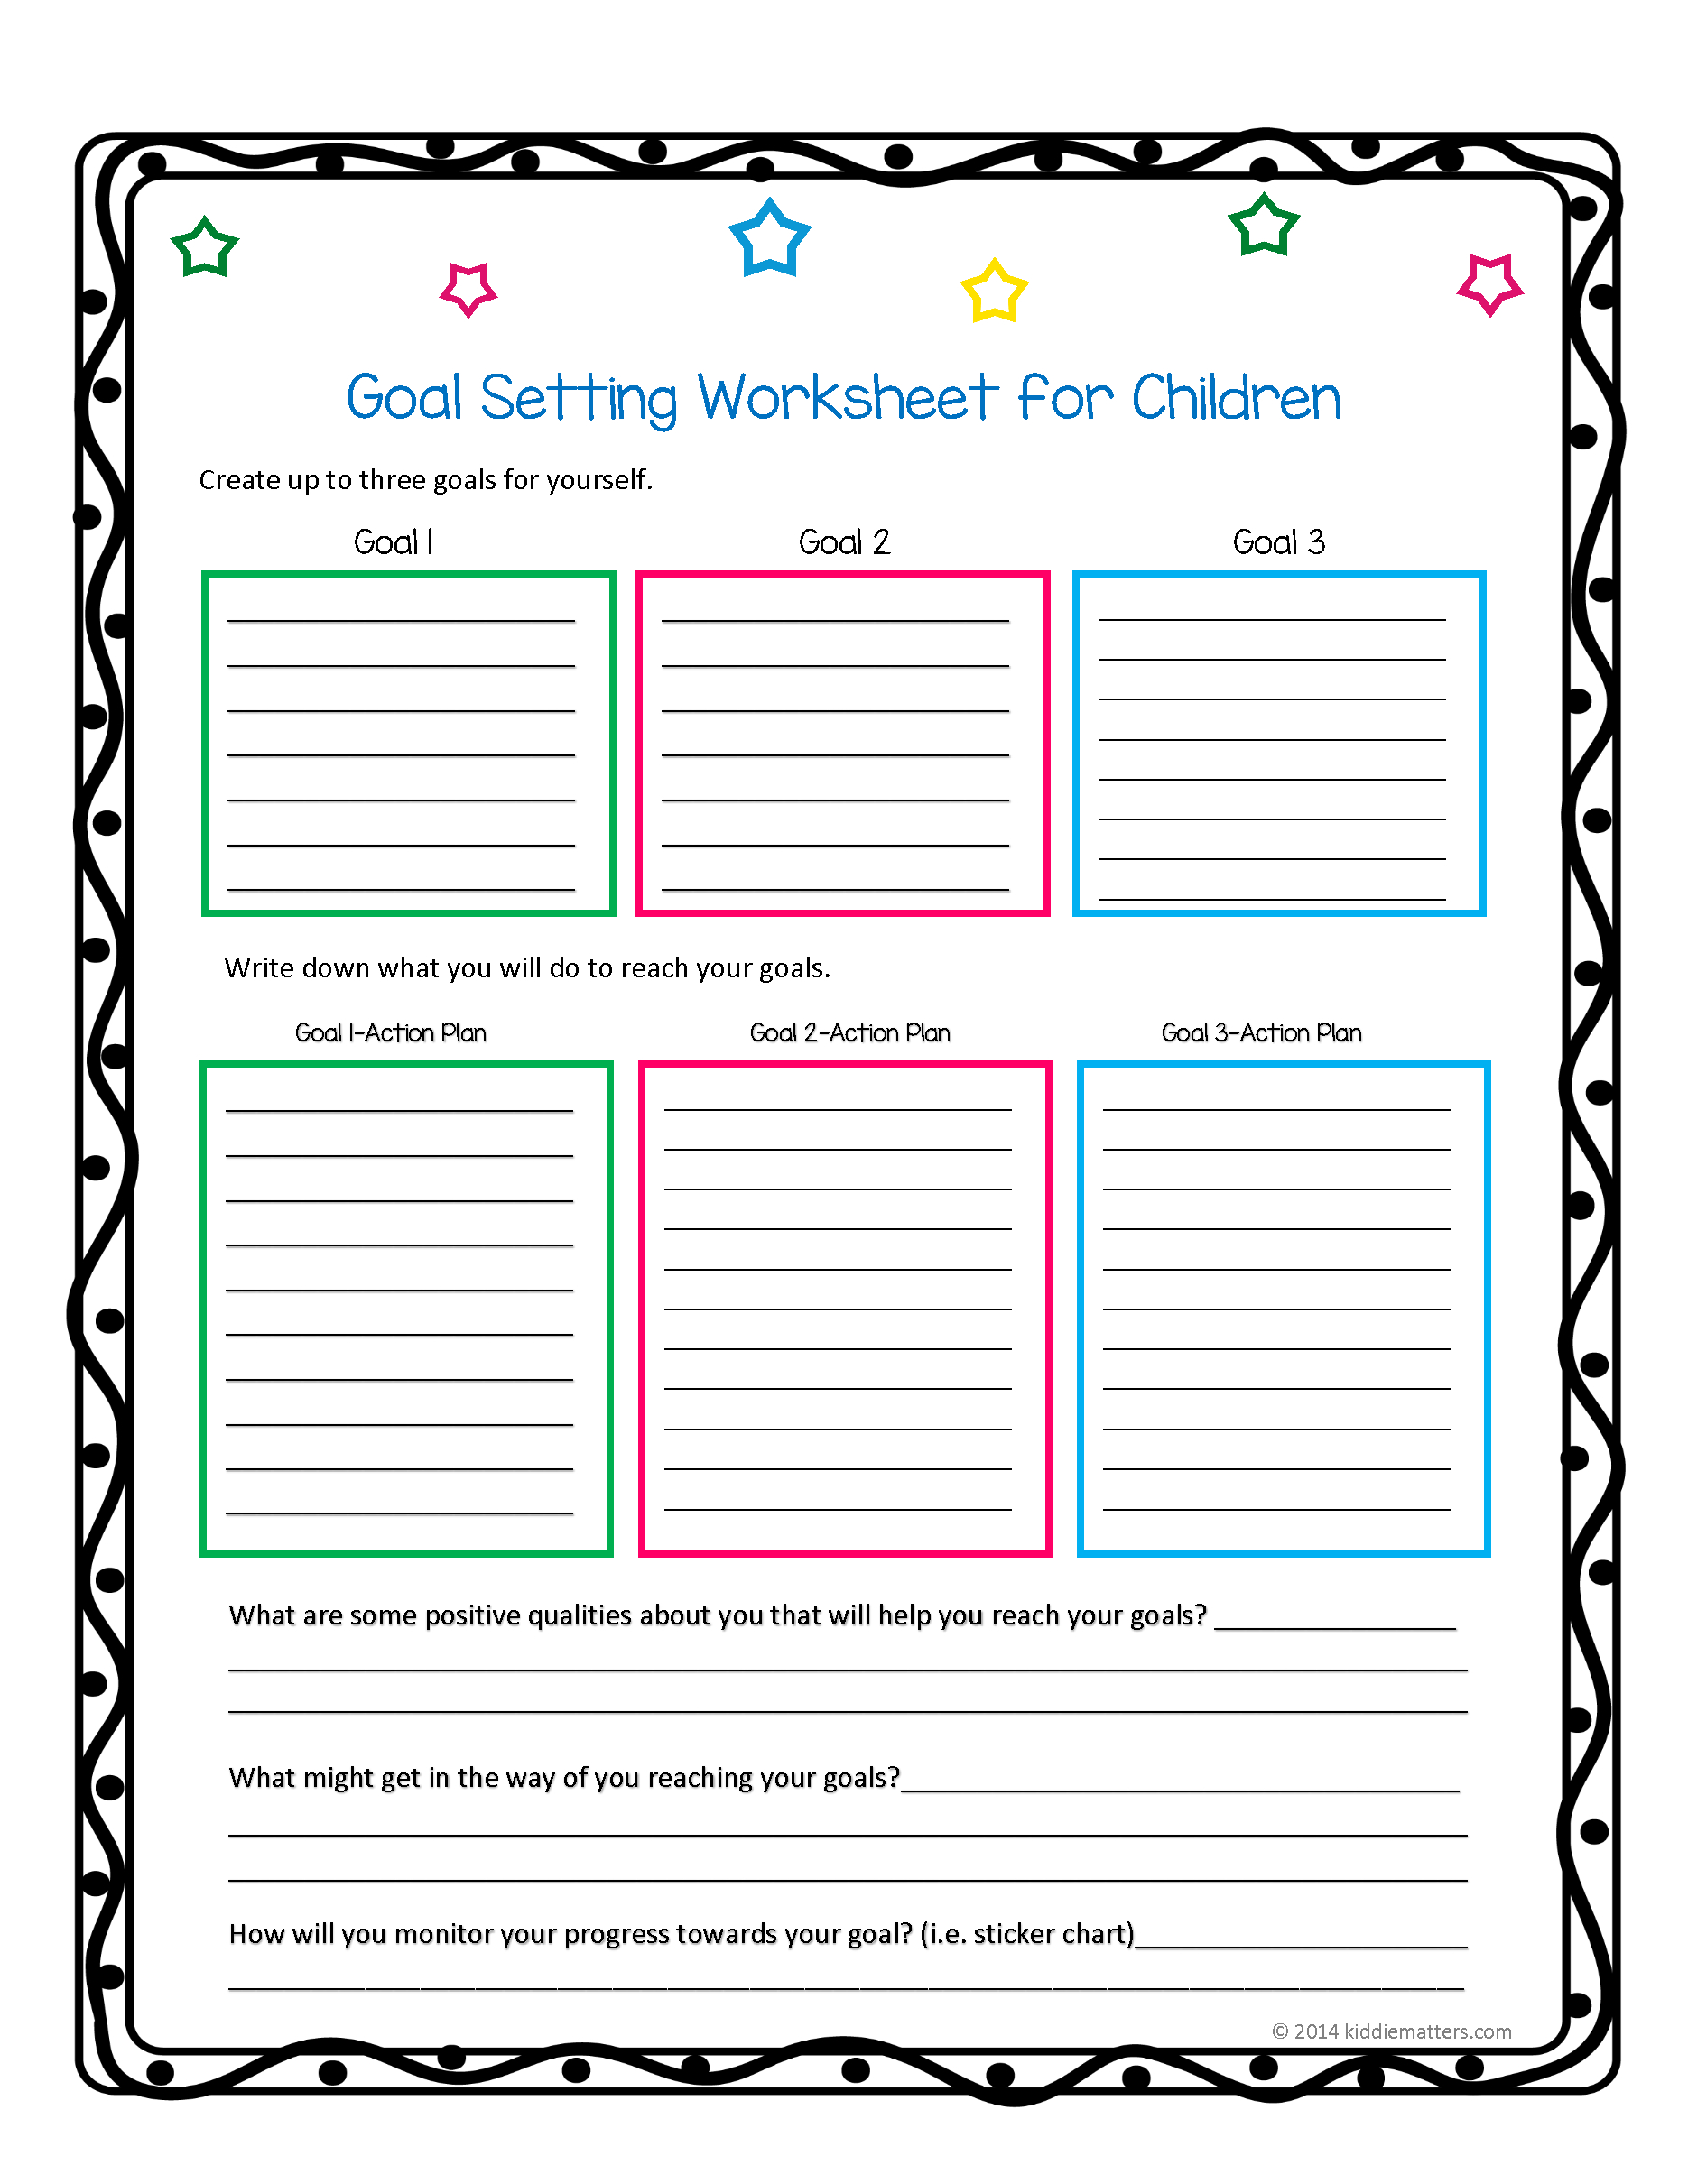 This Worksheet And Free Printable Helps Children Learn How To Set - Free Printable Social Skills Activities Worksheets